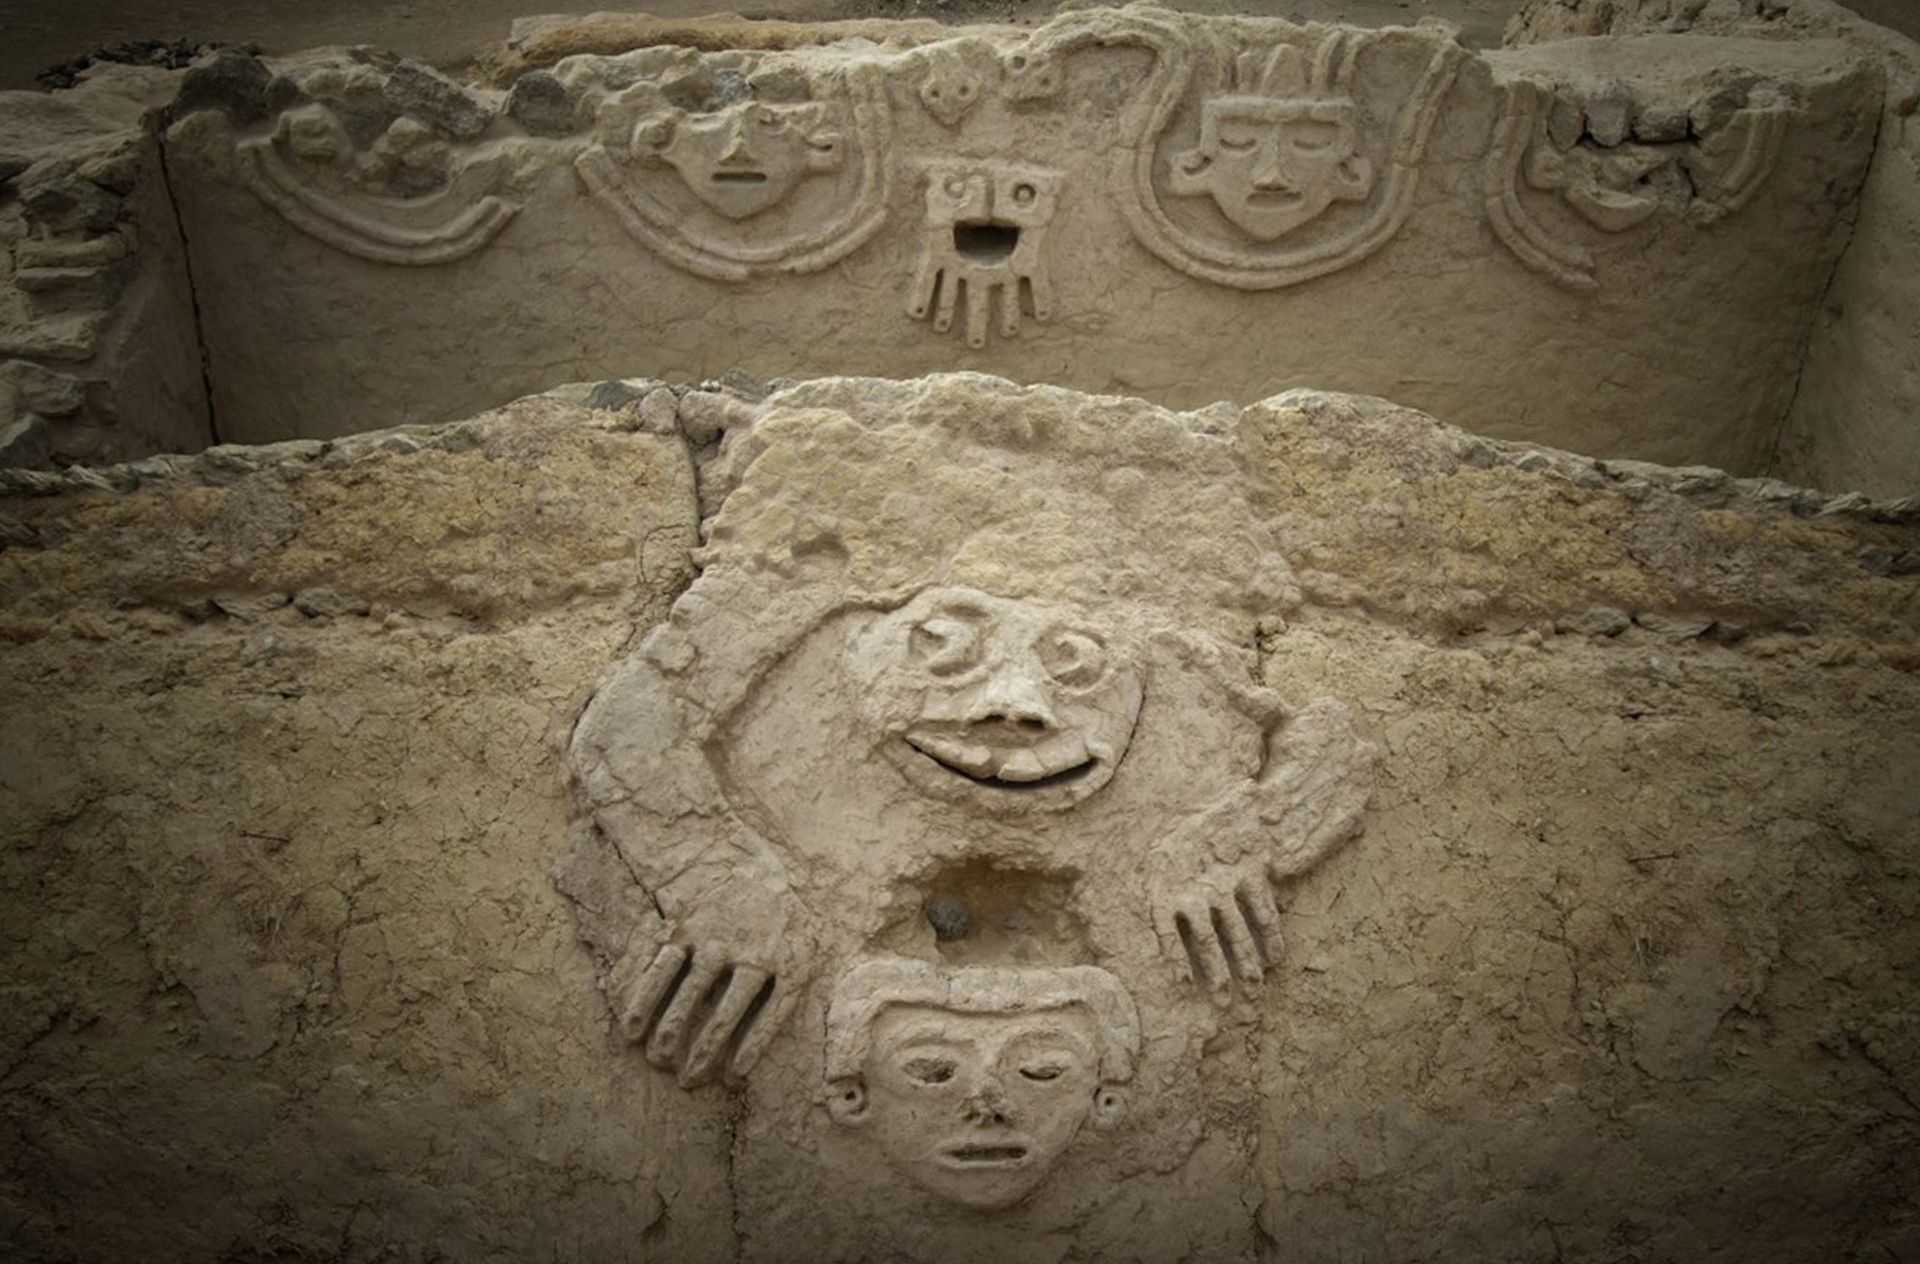 epa07781532 An undated handout photo made available by Archaeological Area Caral shows a humanized toad and an anthropomorphic head, discovered in one of the buildings of the civilization of Caral, north of Lima, Peru, Issued 19 August 2019. A humanized toad and an anthropomorphic head are the new reliefs of some 3,800 years old discovered in one of the buildings of the civilization of Caral, the oldest in America known so far, which developed in the valleys of northern Lima.  EPA/Archaeological Area Caral HANDOUT  HANDOUT EDITORIAL USE ONLY/NO SALES